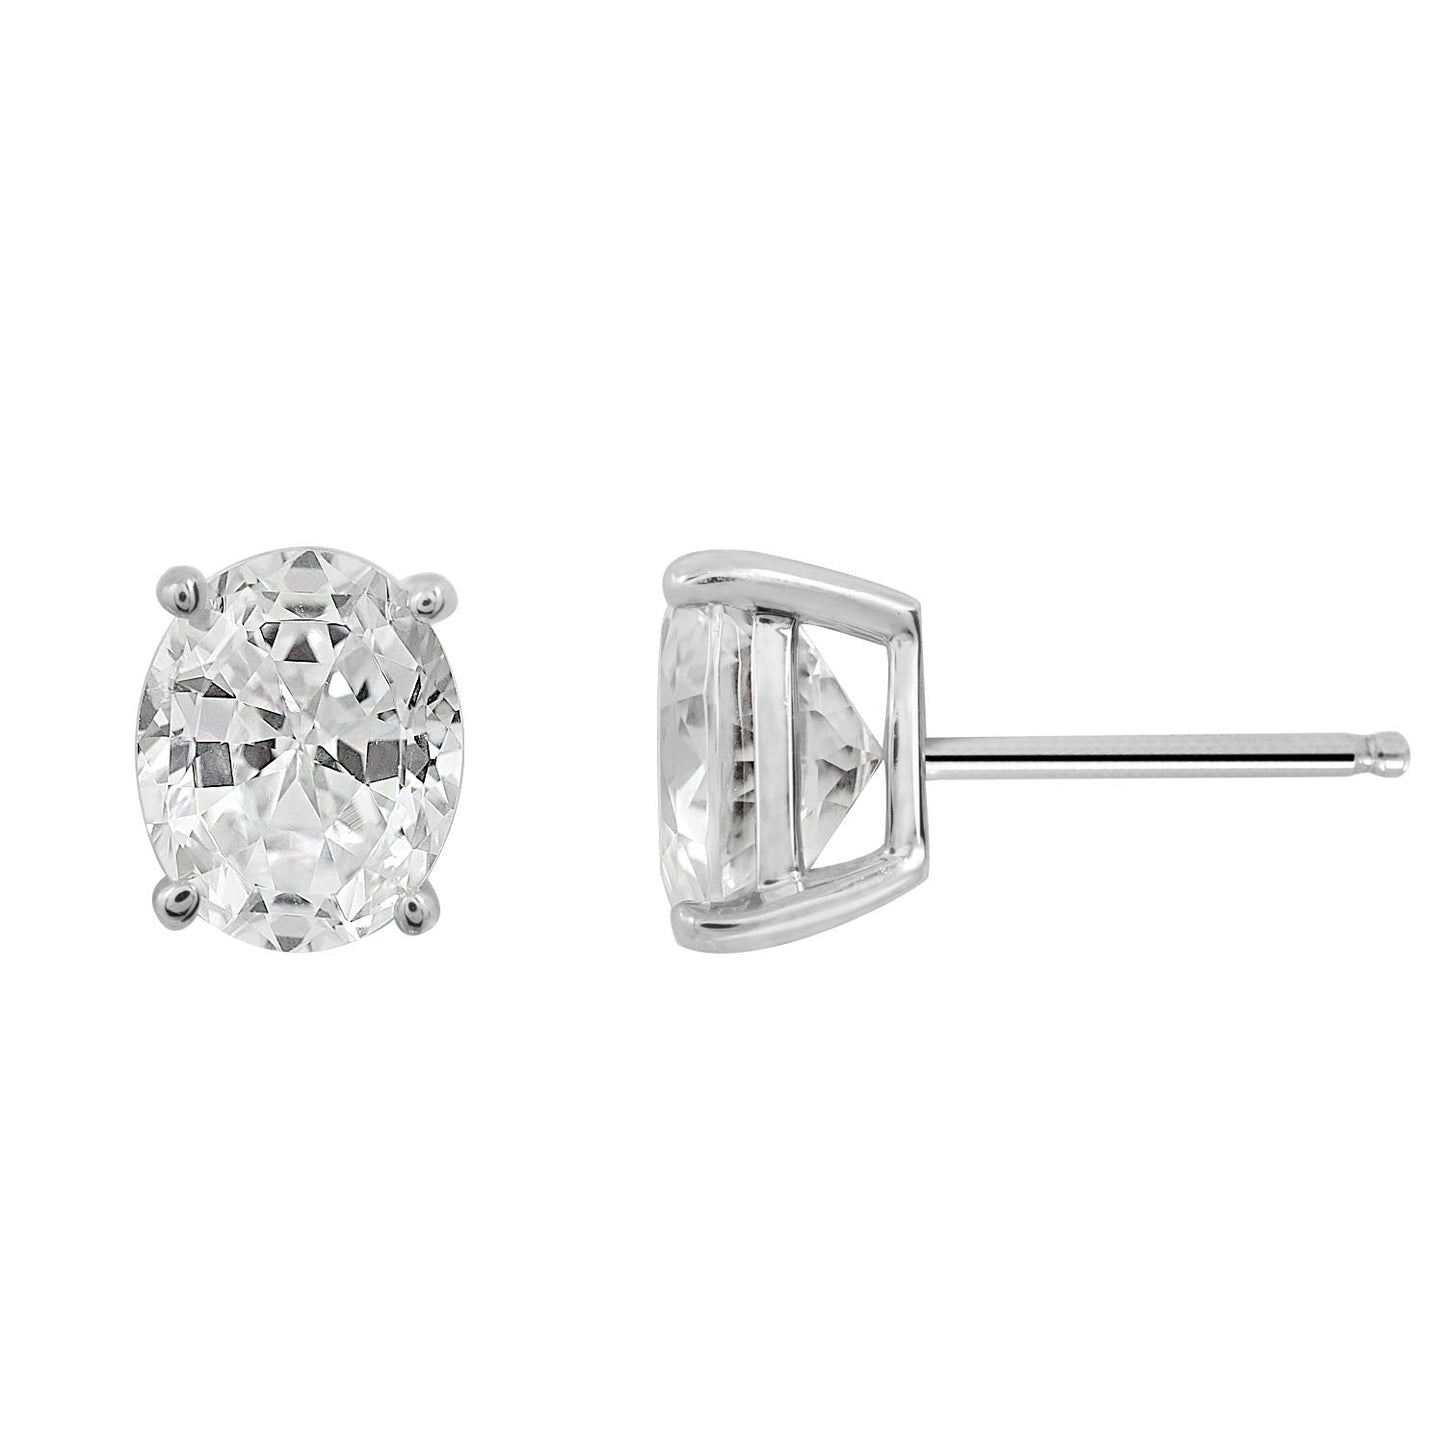 4ct Solitaire Oval Stud Earrings JEE23754